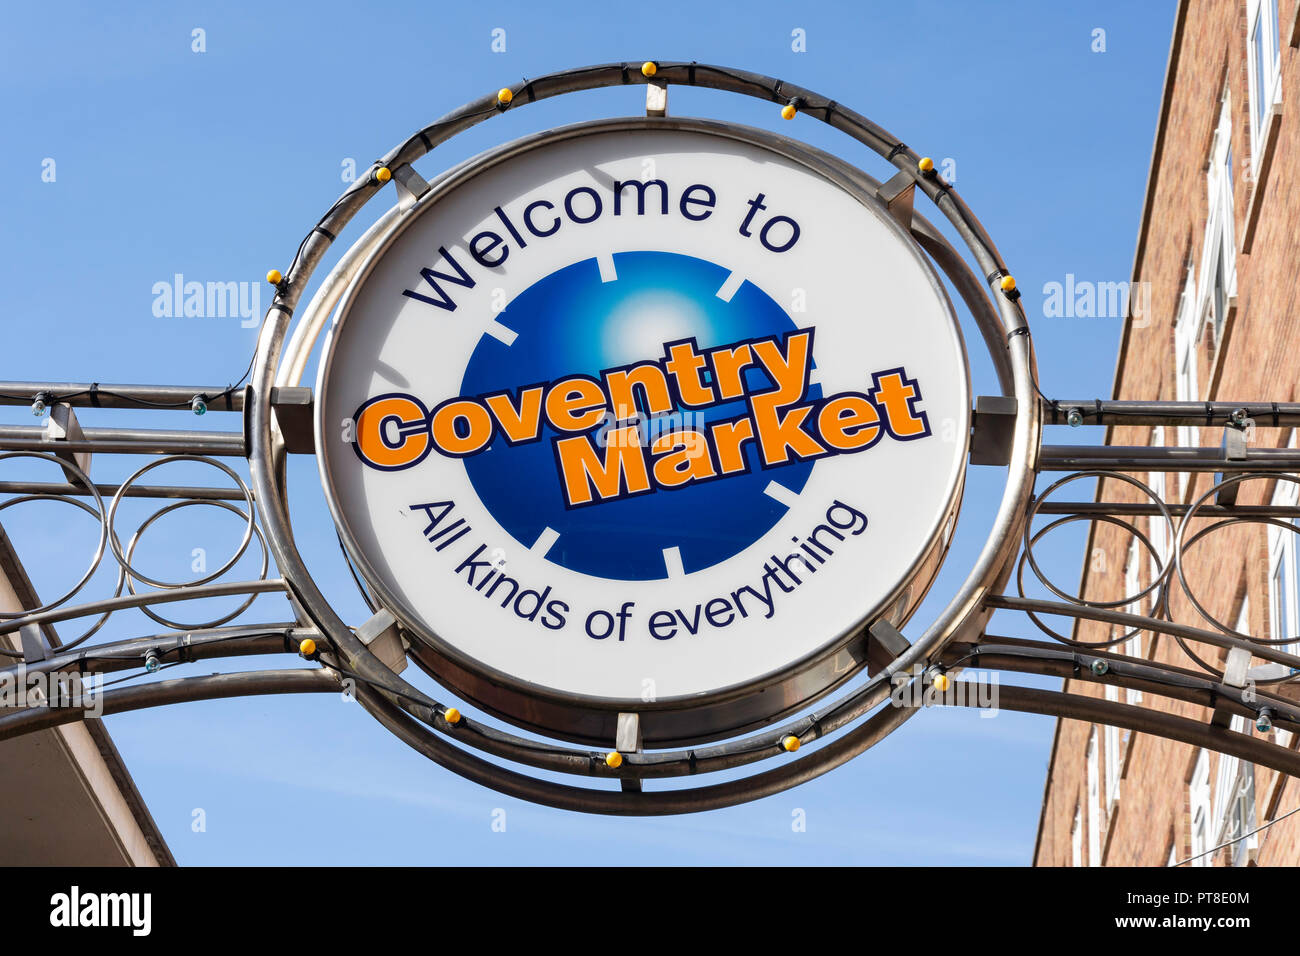 Entrance sign, Coventry Market, Coventry, West Midlands, England, United Kingdom Stock Photo